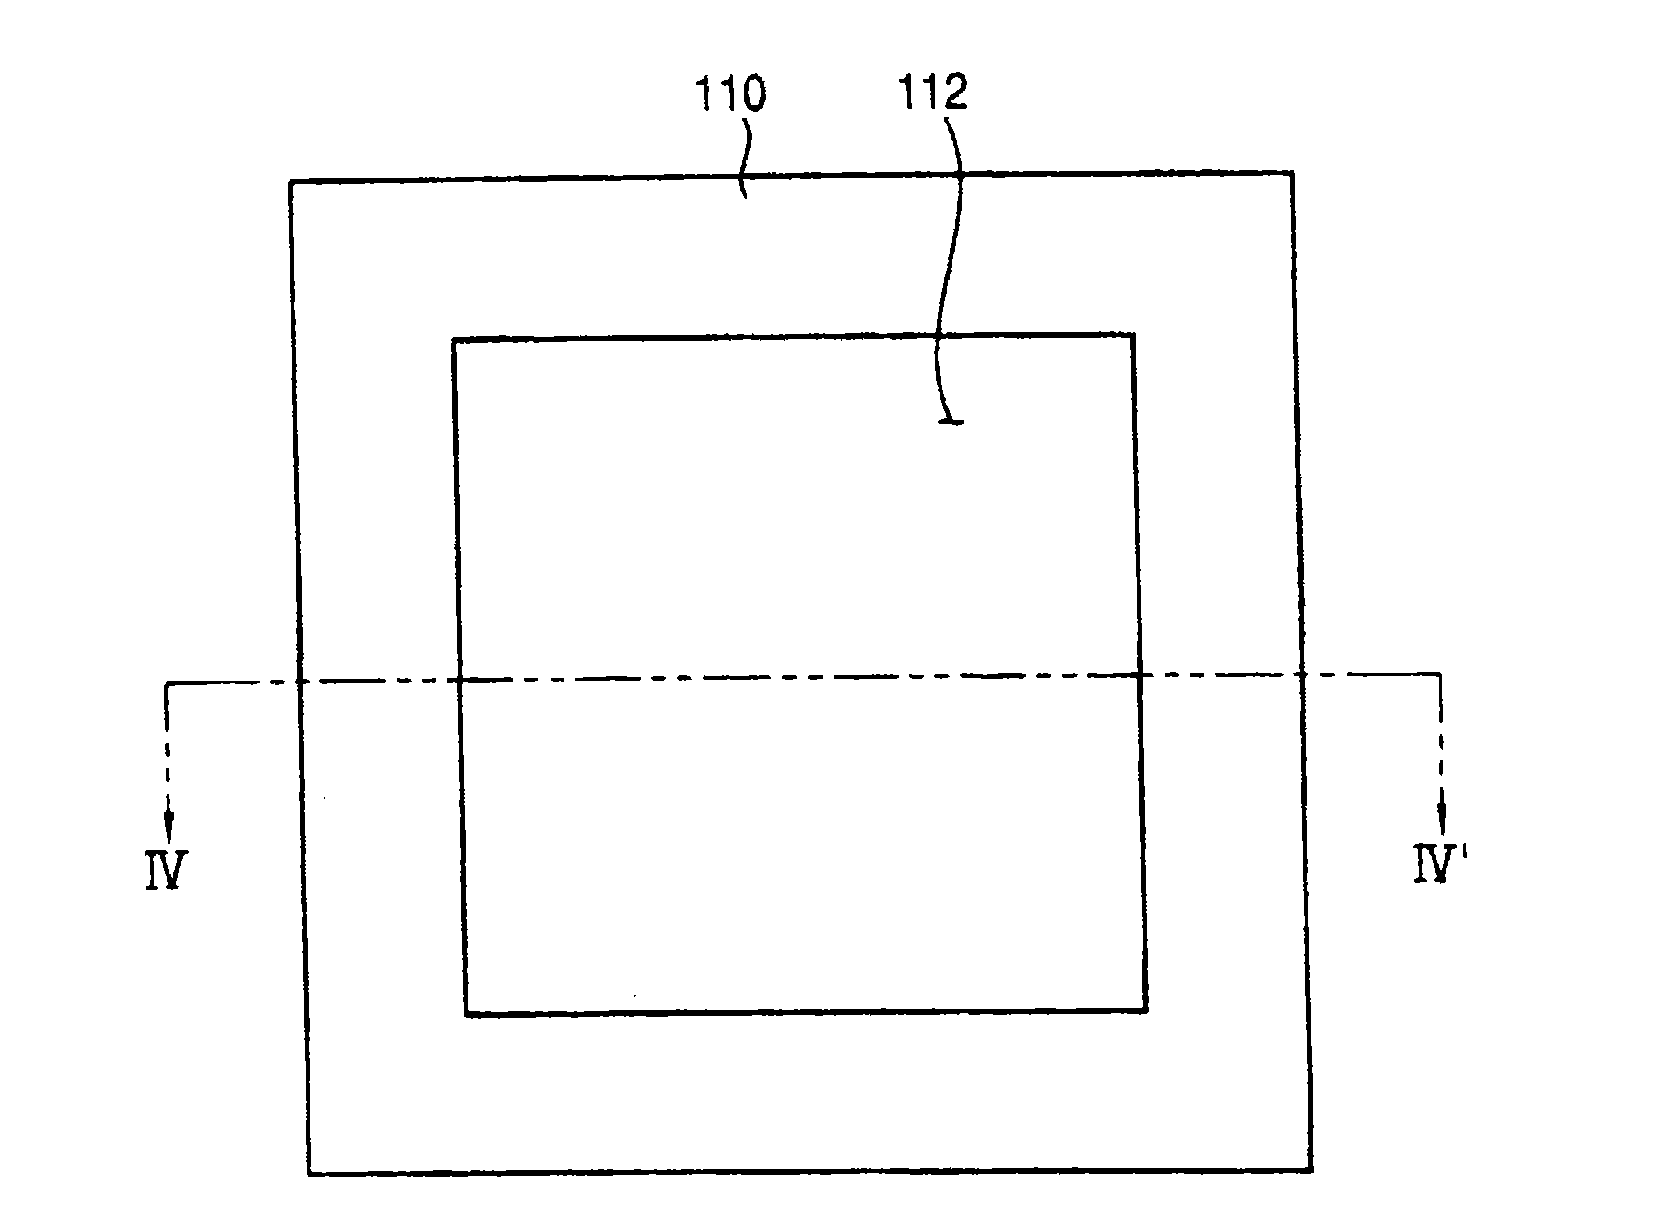 Bonding pad structure and semiconductor device including the bonding pad structure